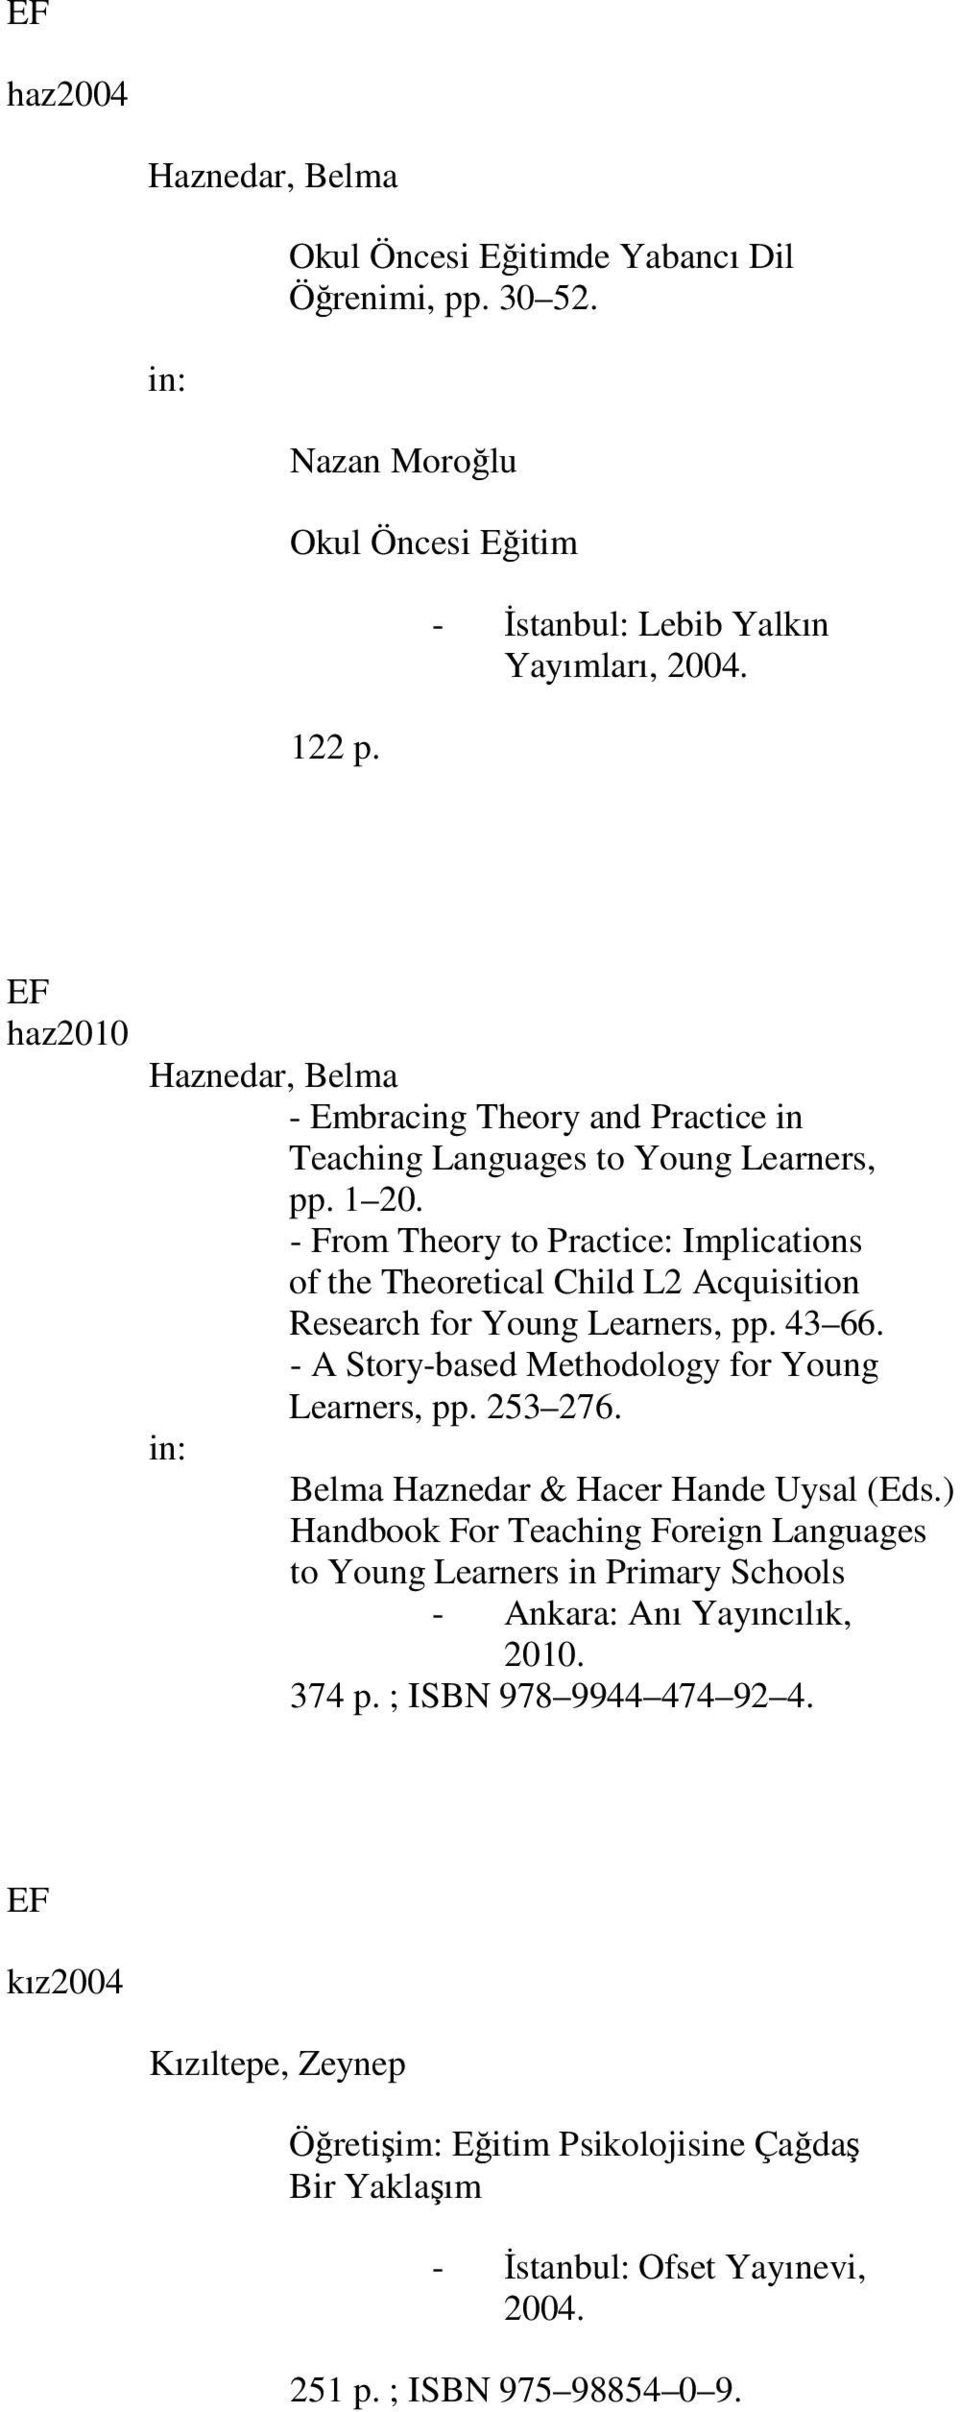 - From Theory to Practice: Implications of the Theoretical Child L2 Acquisition Research for Young Learners, pp. 43 66. - A Story-based Methodology for Young Learners, pp. 253 276.